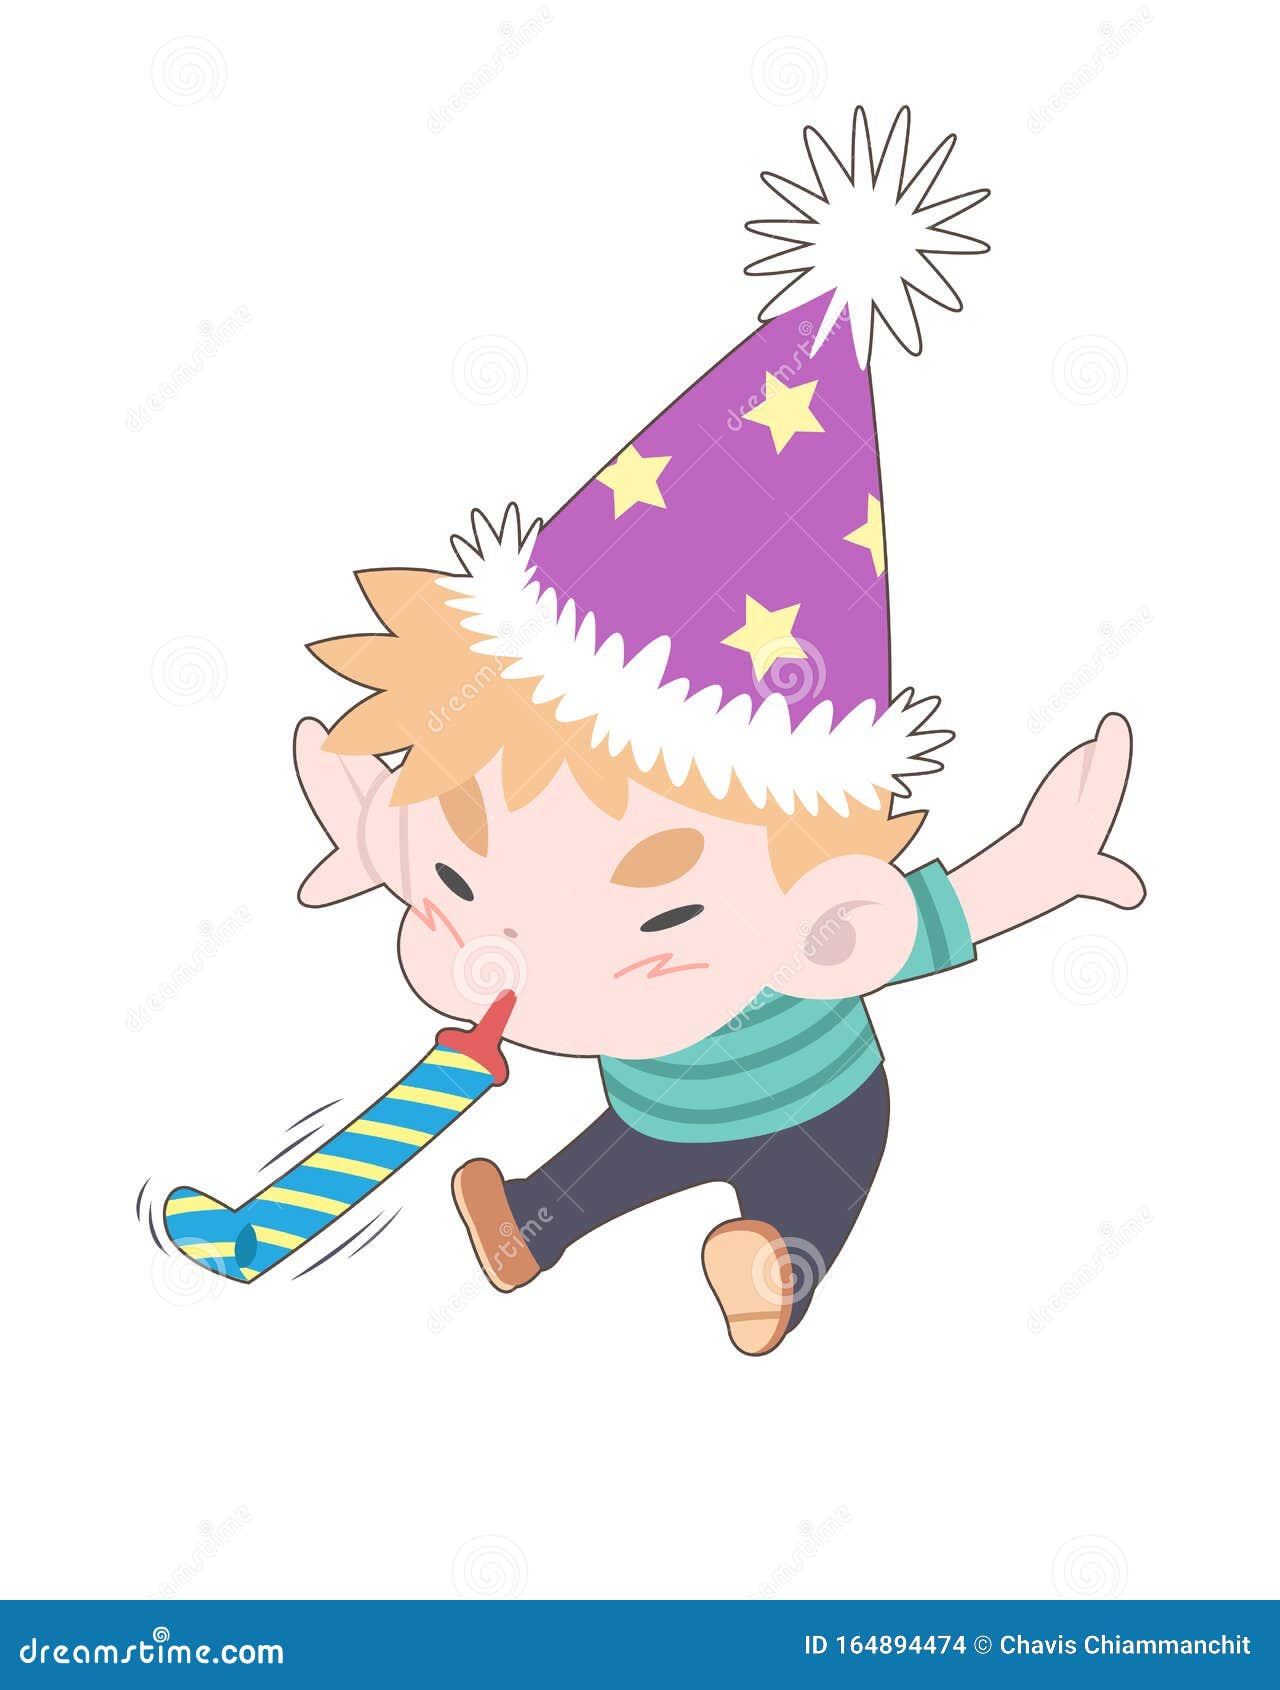 Download Cute Boy Blowing Party Horn Cartoon Illustration Stock ...